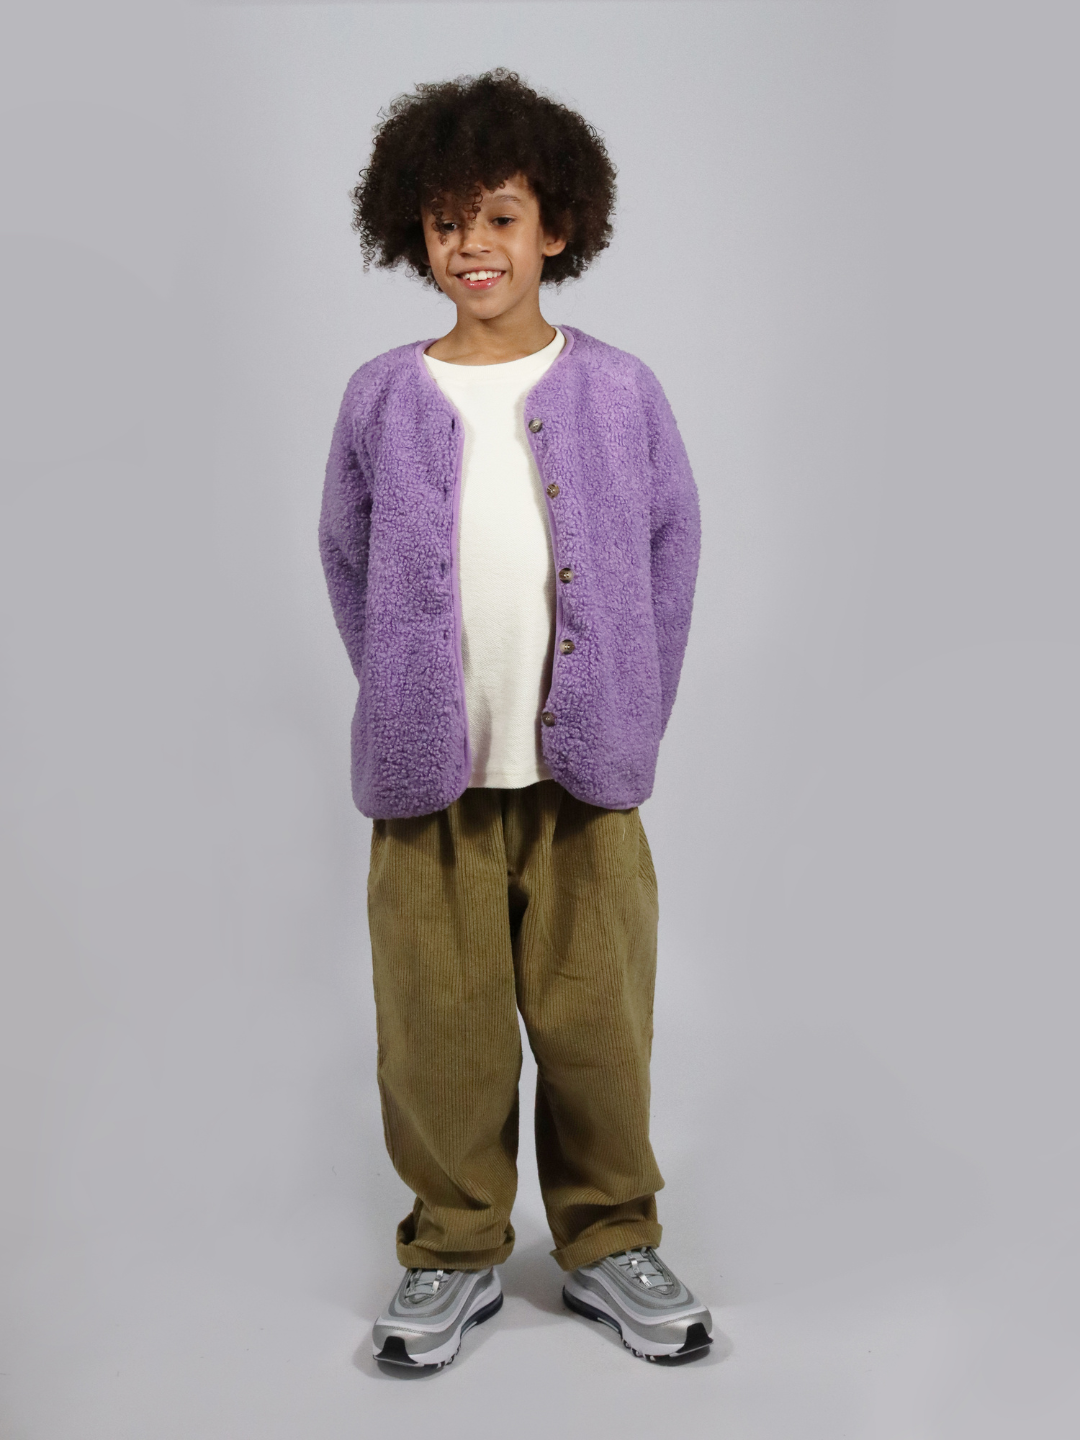 Lavender | A child wearing a light purple collarless fleece jacket with four brown buttons, with olive green pants, a white t-shirt and grey sneakers, standing on a light grey background.